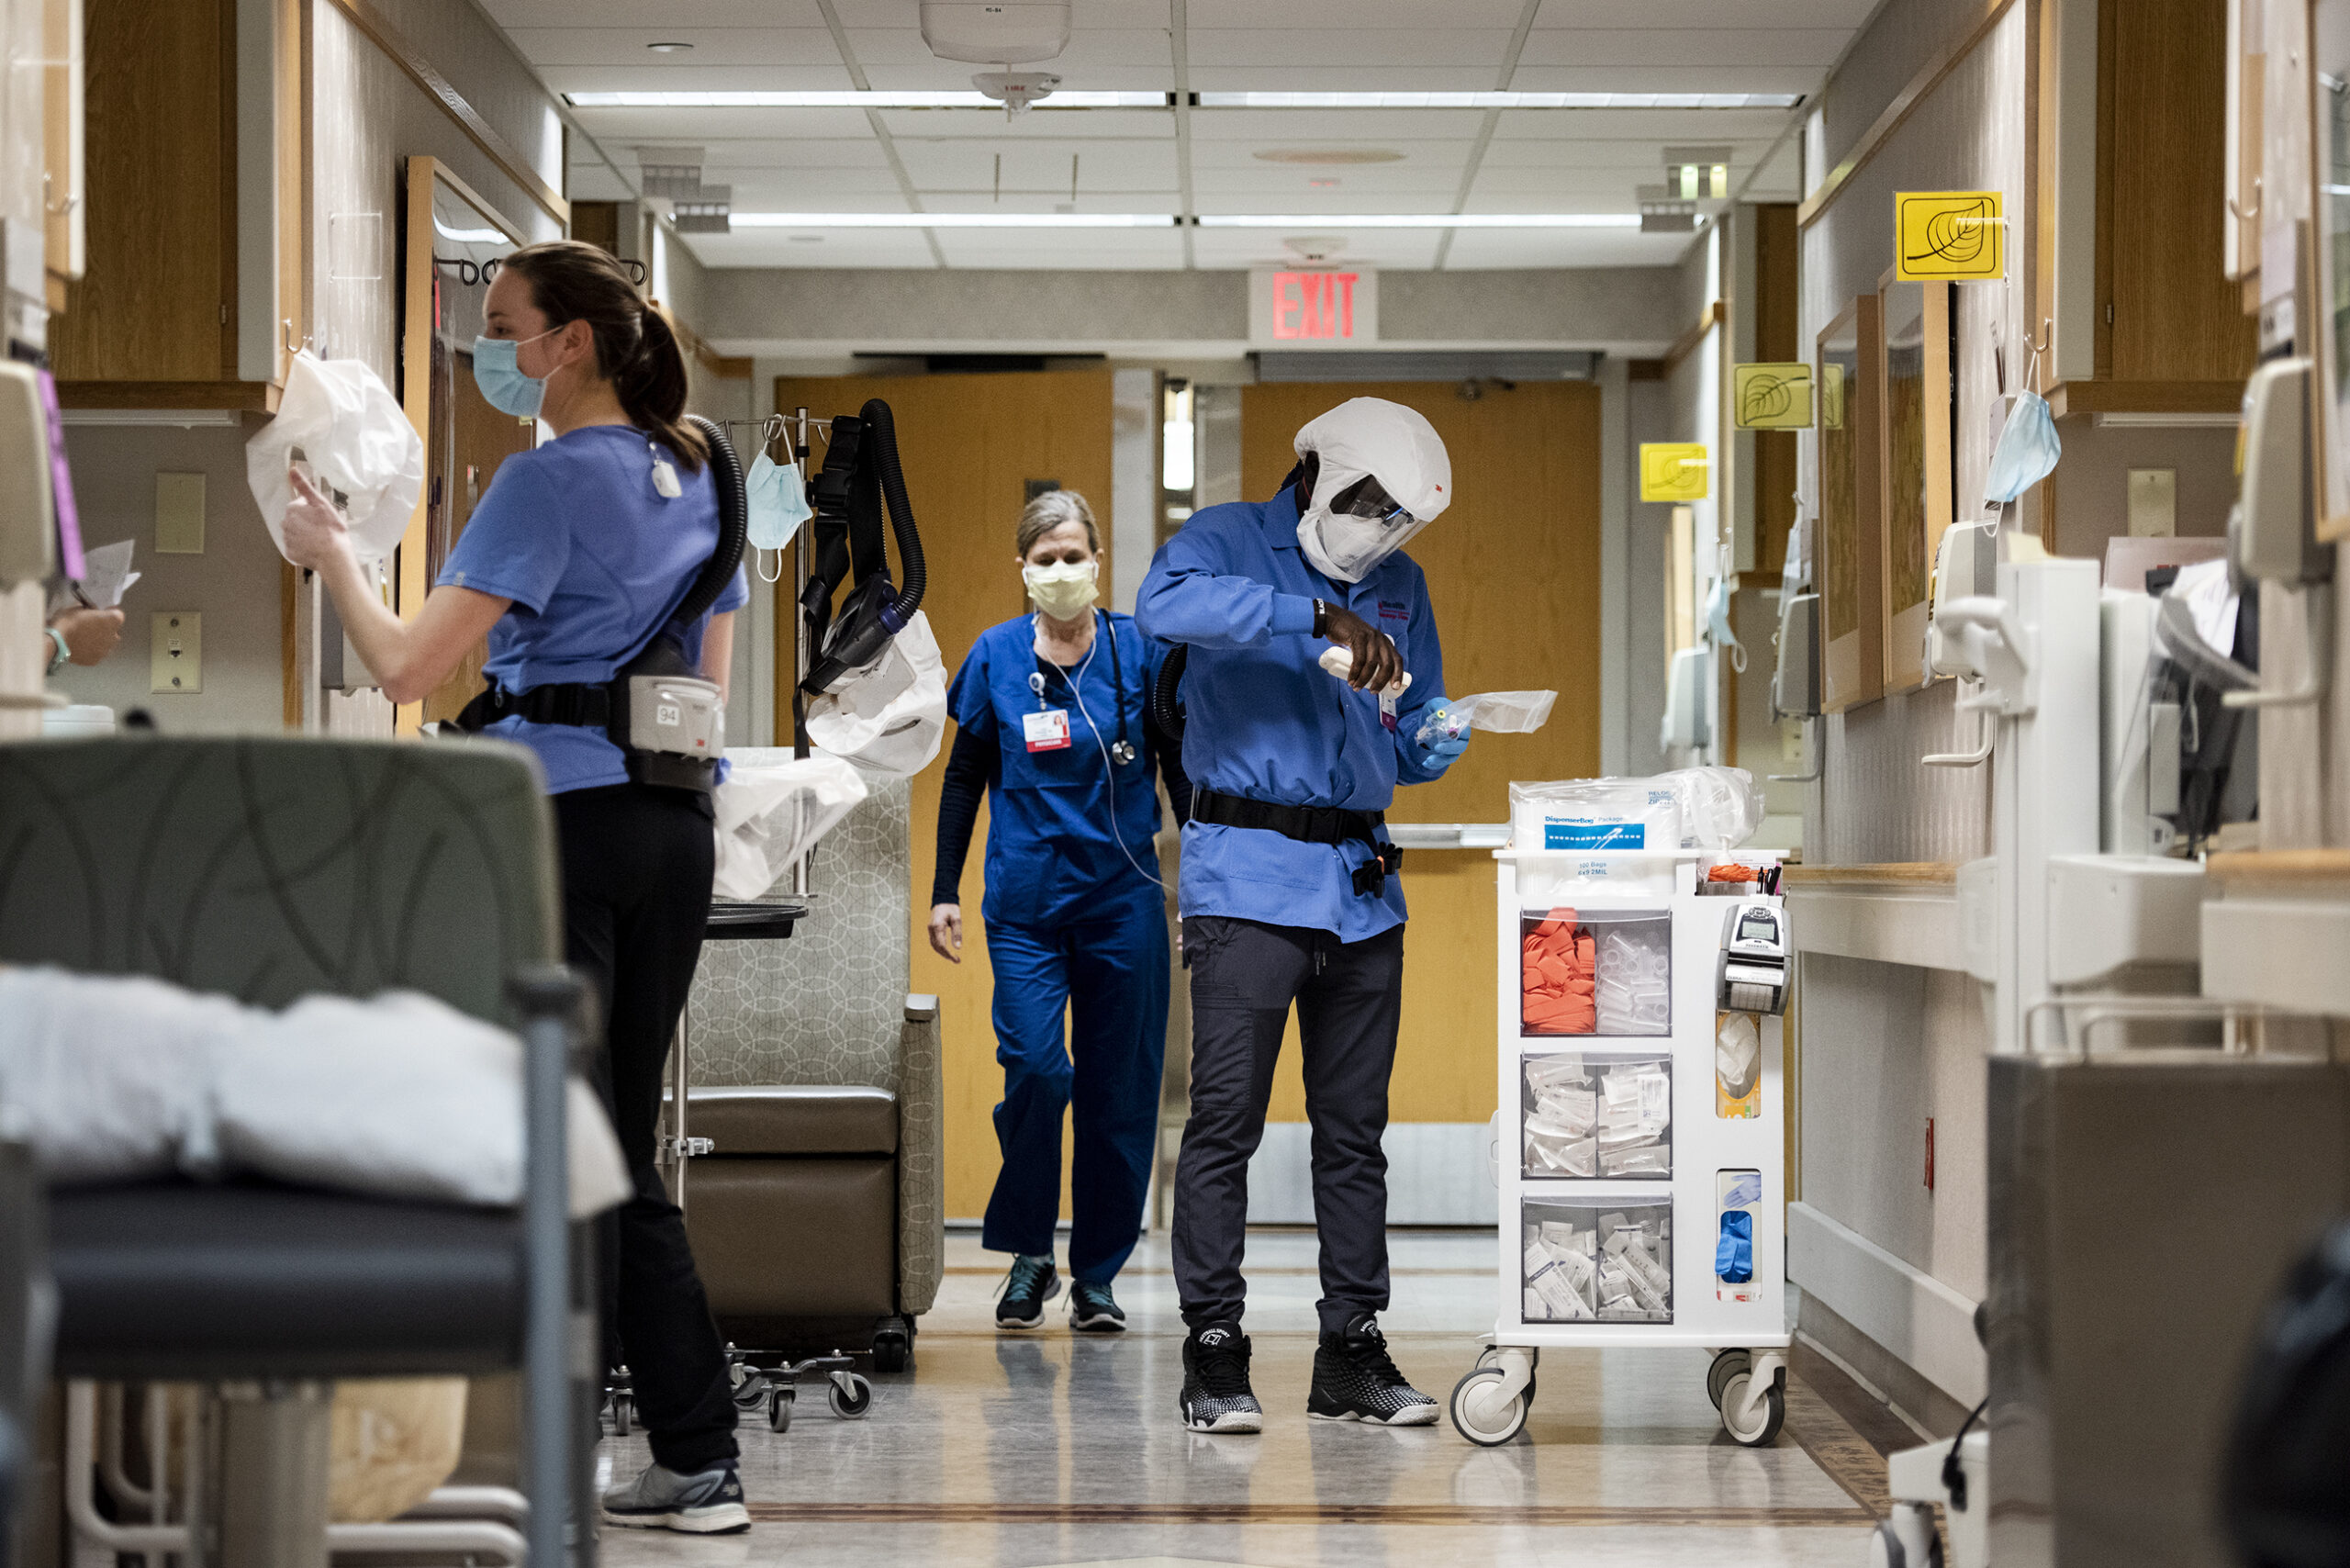 Several healthcare workers perform different tasks in a hospital hallway